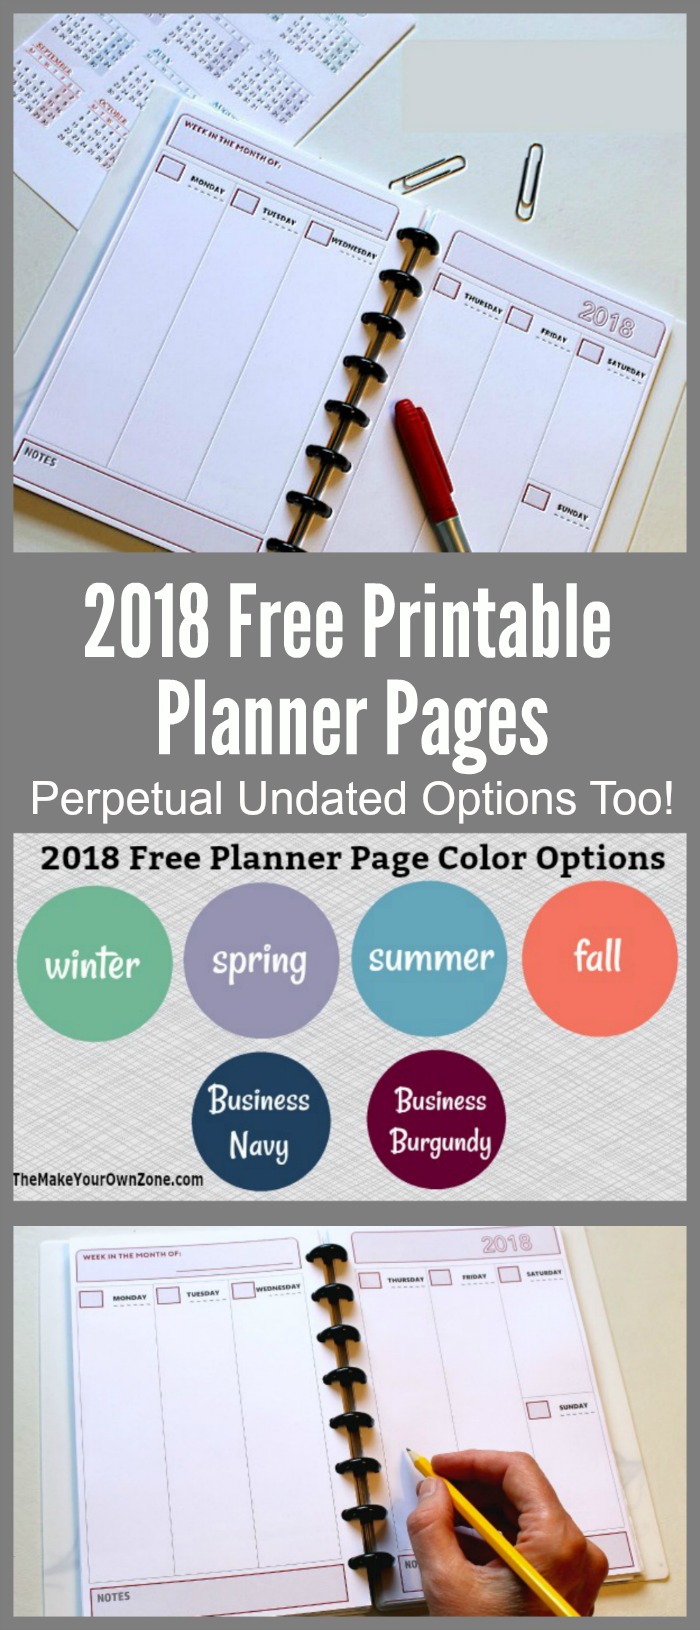 Free Printable Planner Pages for Arc Notebooks - 2018 (and perpetual undated options too!) 3 styles and 6 color options available.